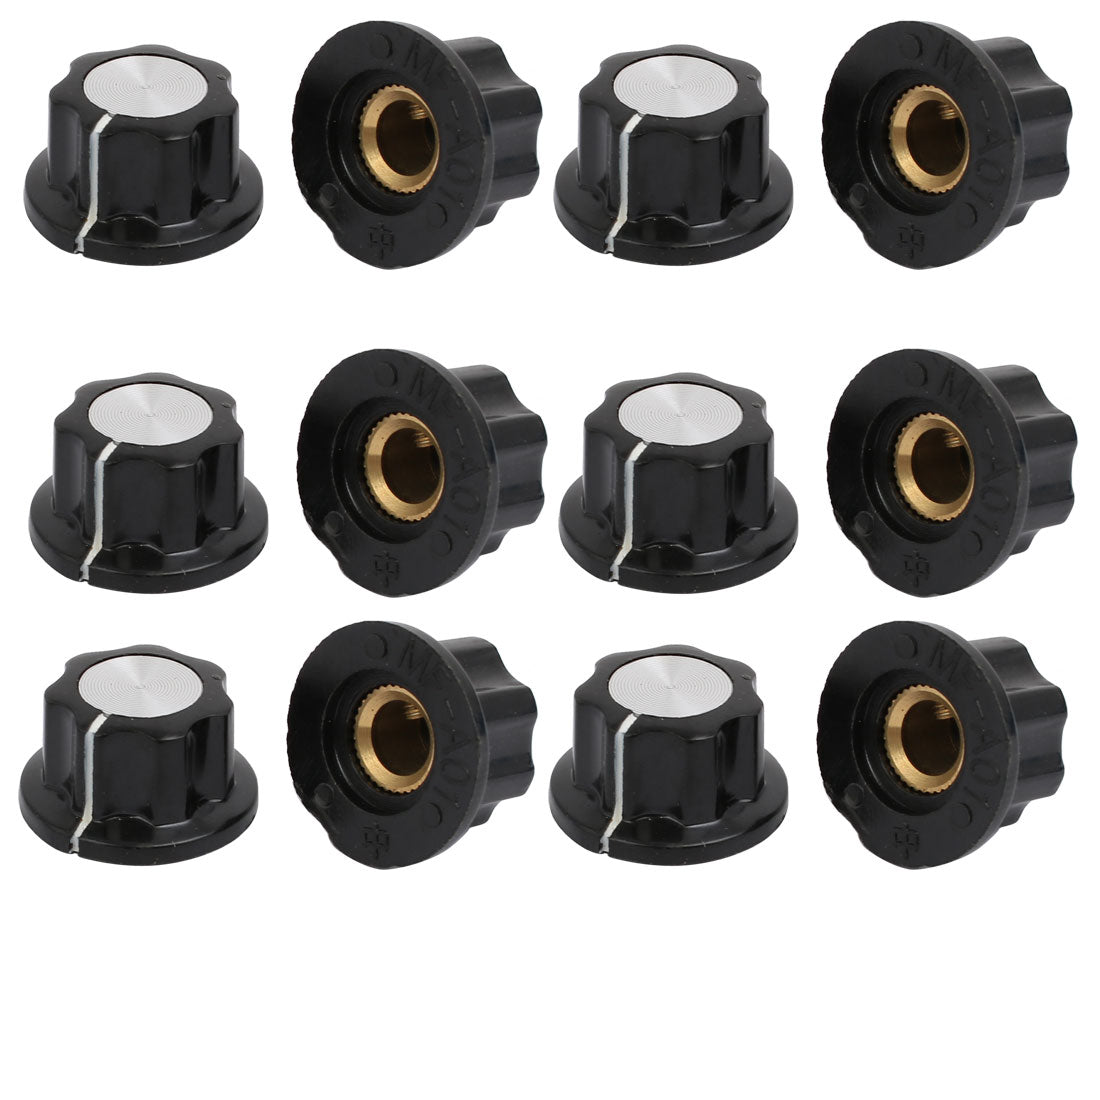 uxcell Uxcell 12 Pcs Black 6mm Shaft Insert Dia Potentiometer Control Rotary Knobs Caps